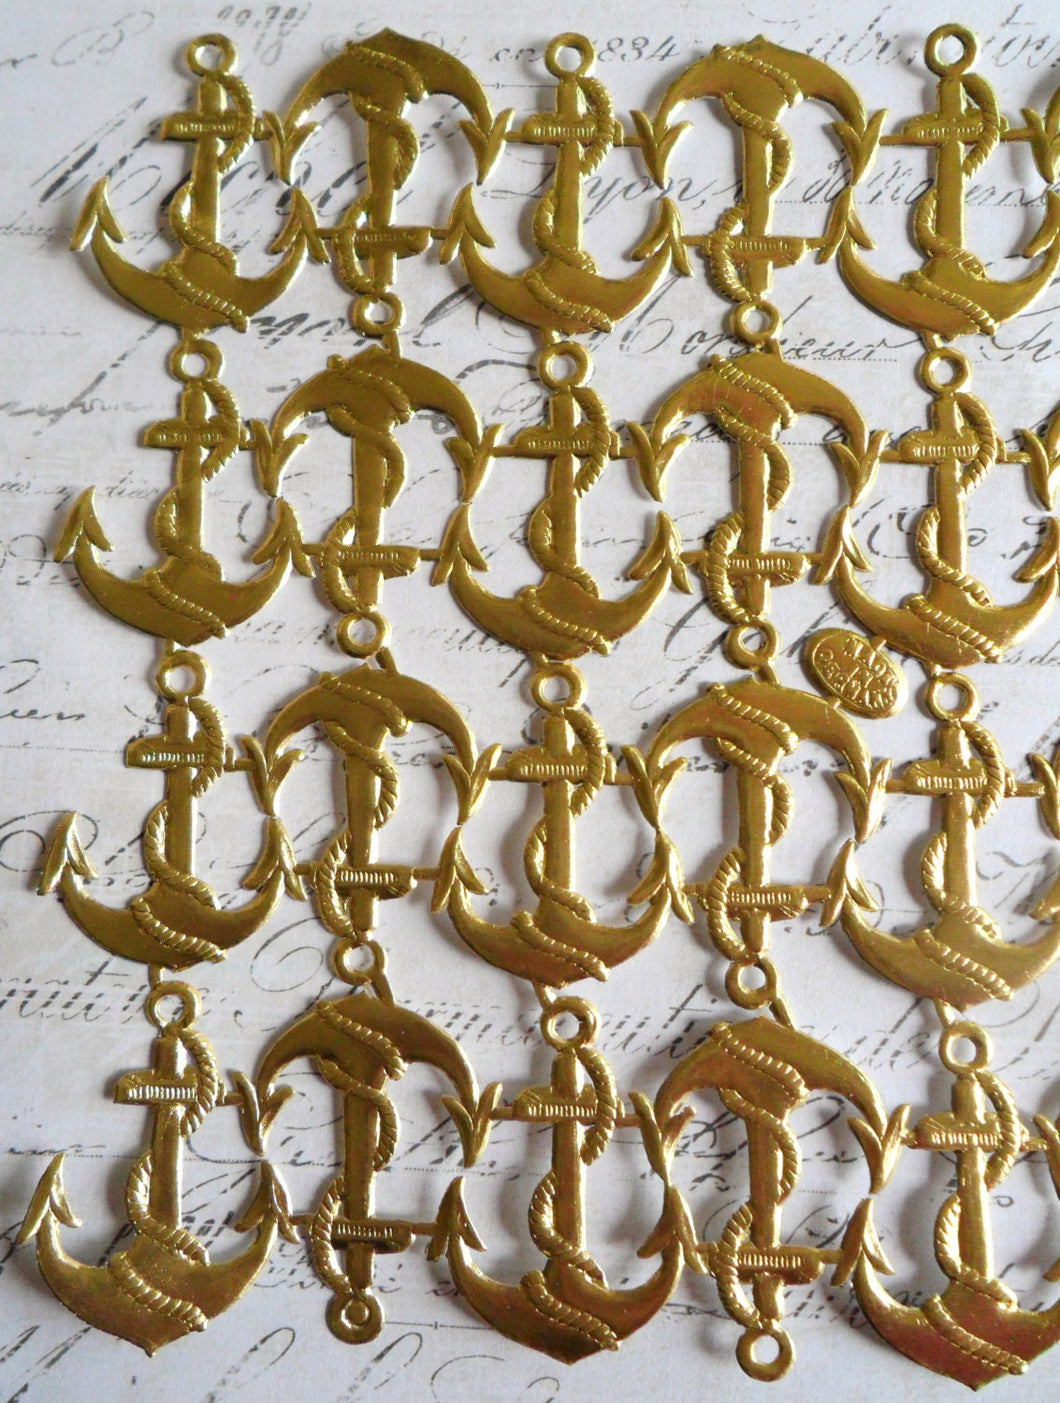 Gold Embossed German Dresden Scrap Anchors,  approx 1.5 inches tall by 1 inch wide